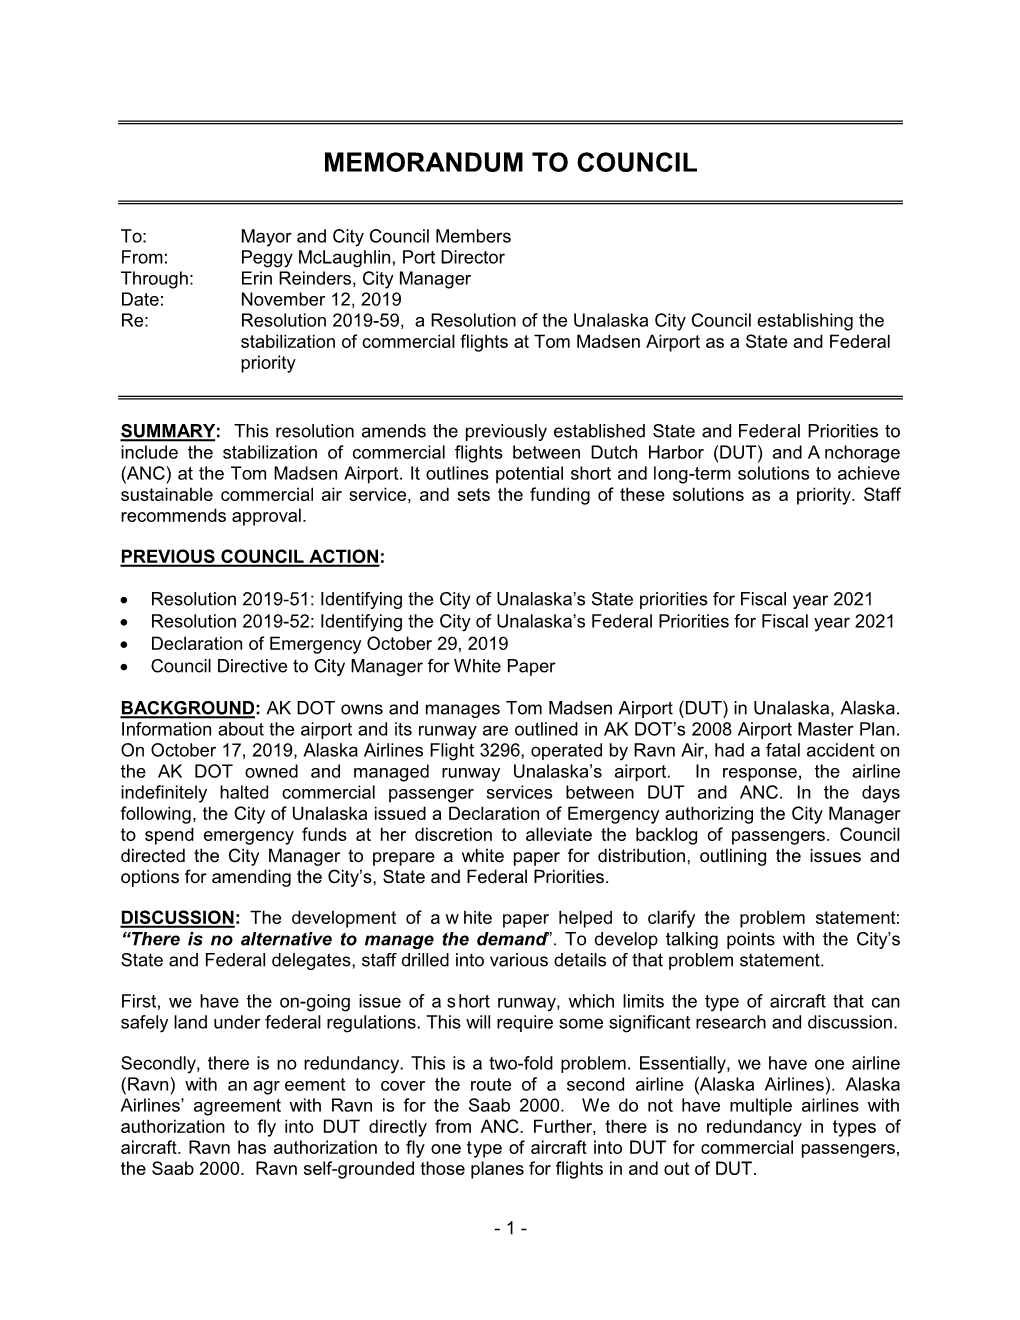 City Manager Memo to Council